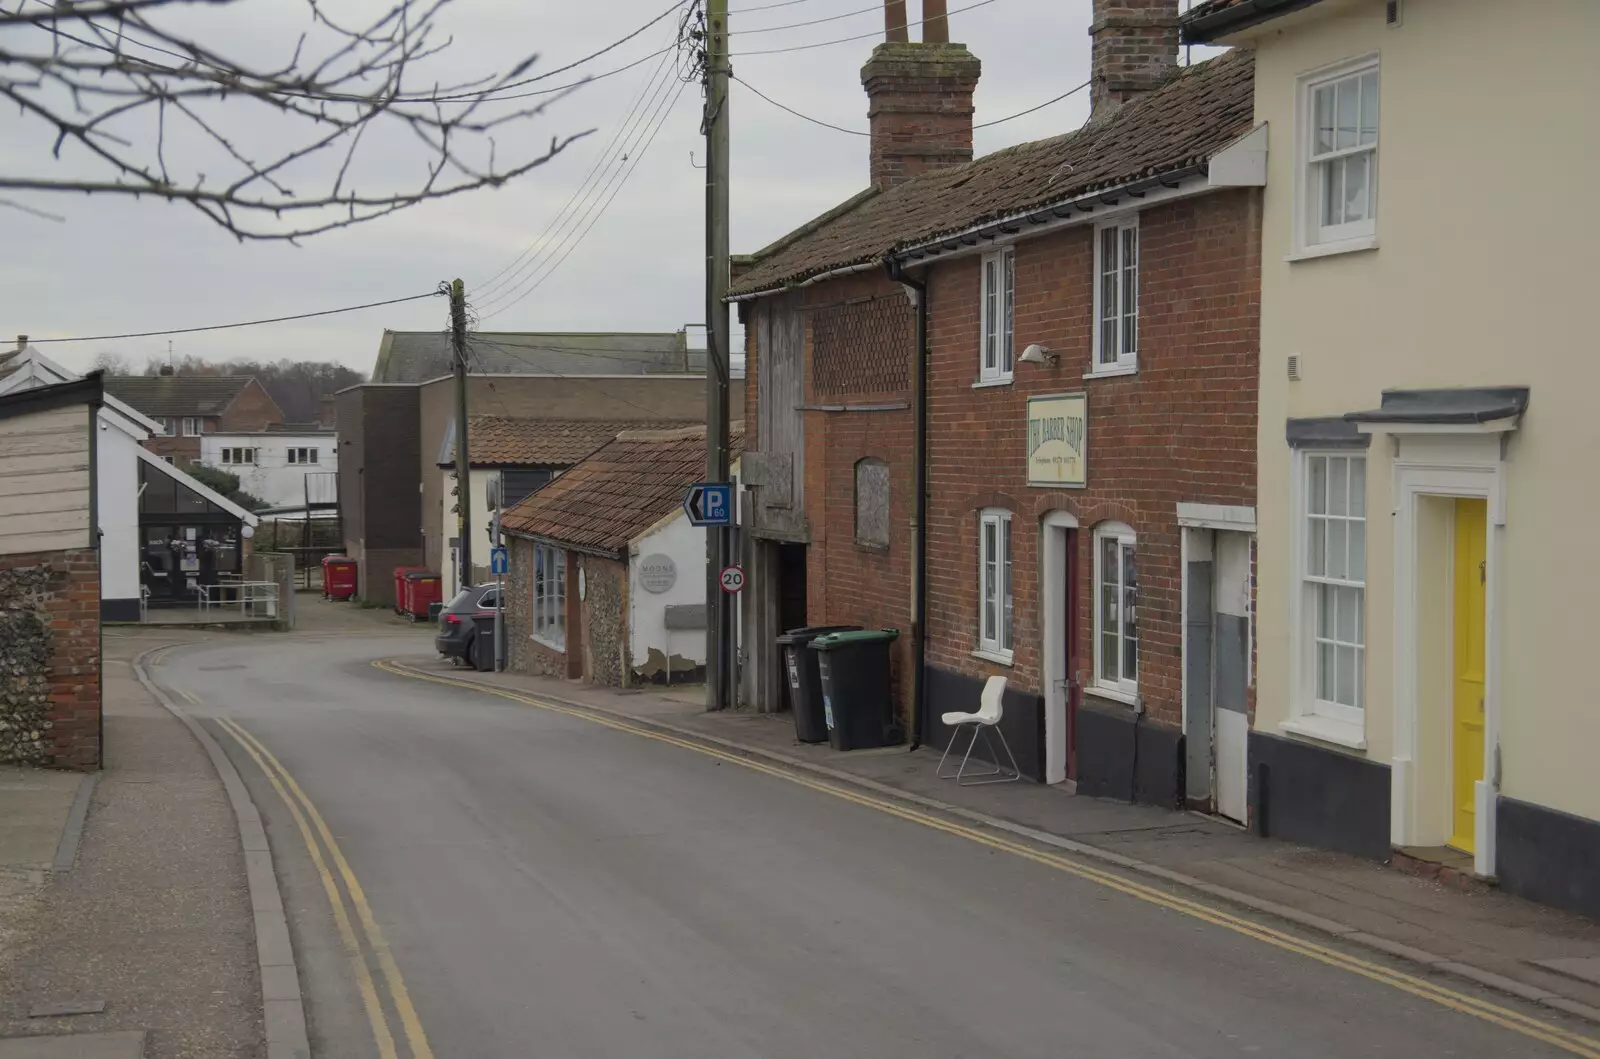 Looking down Chapel Street, from A February Miscellany, Diss and Woodbridge, Suffolk - 3rd February 2024